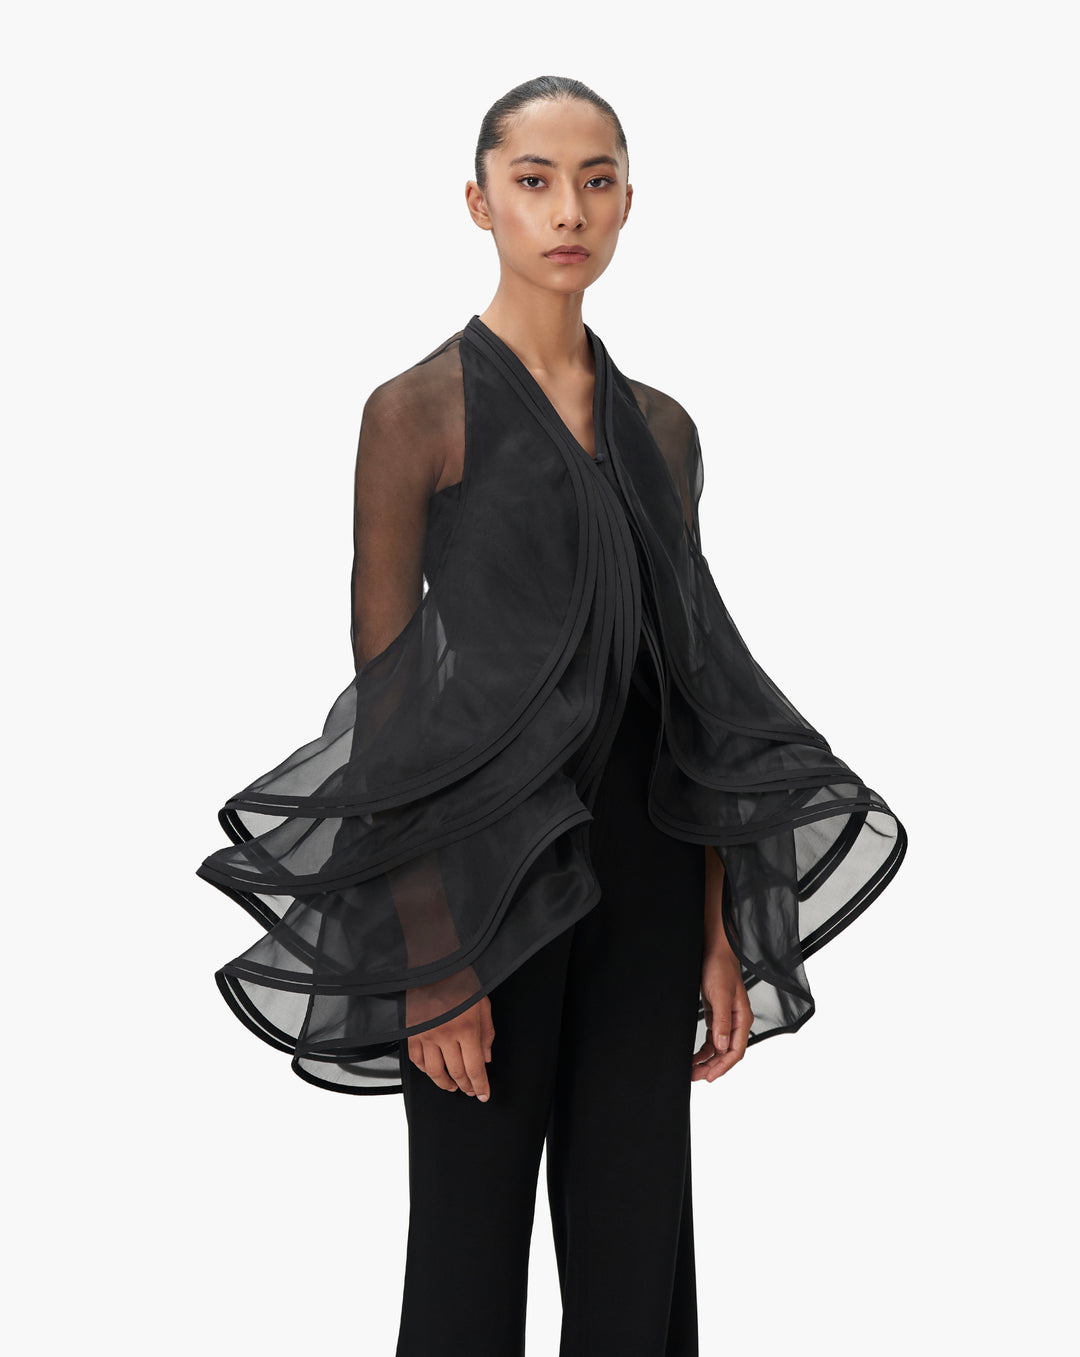 The Black Ruffle Cape with Top - Trouser Set